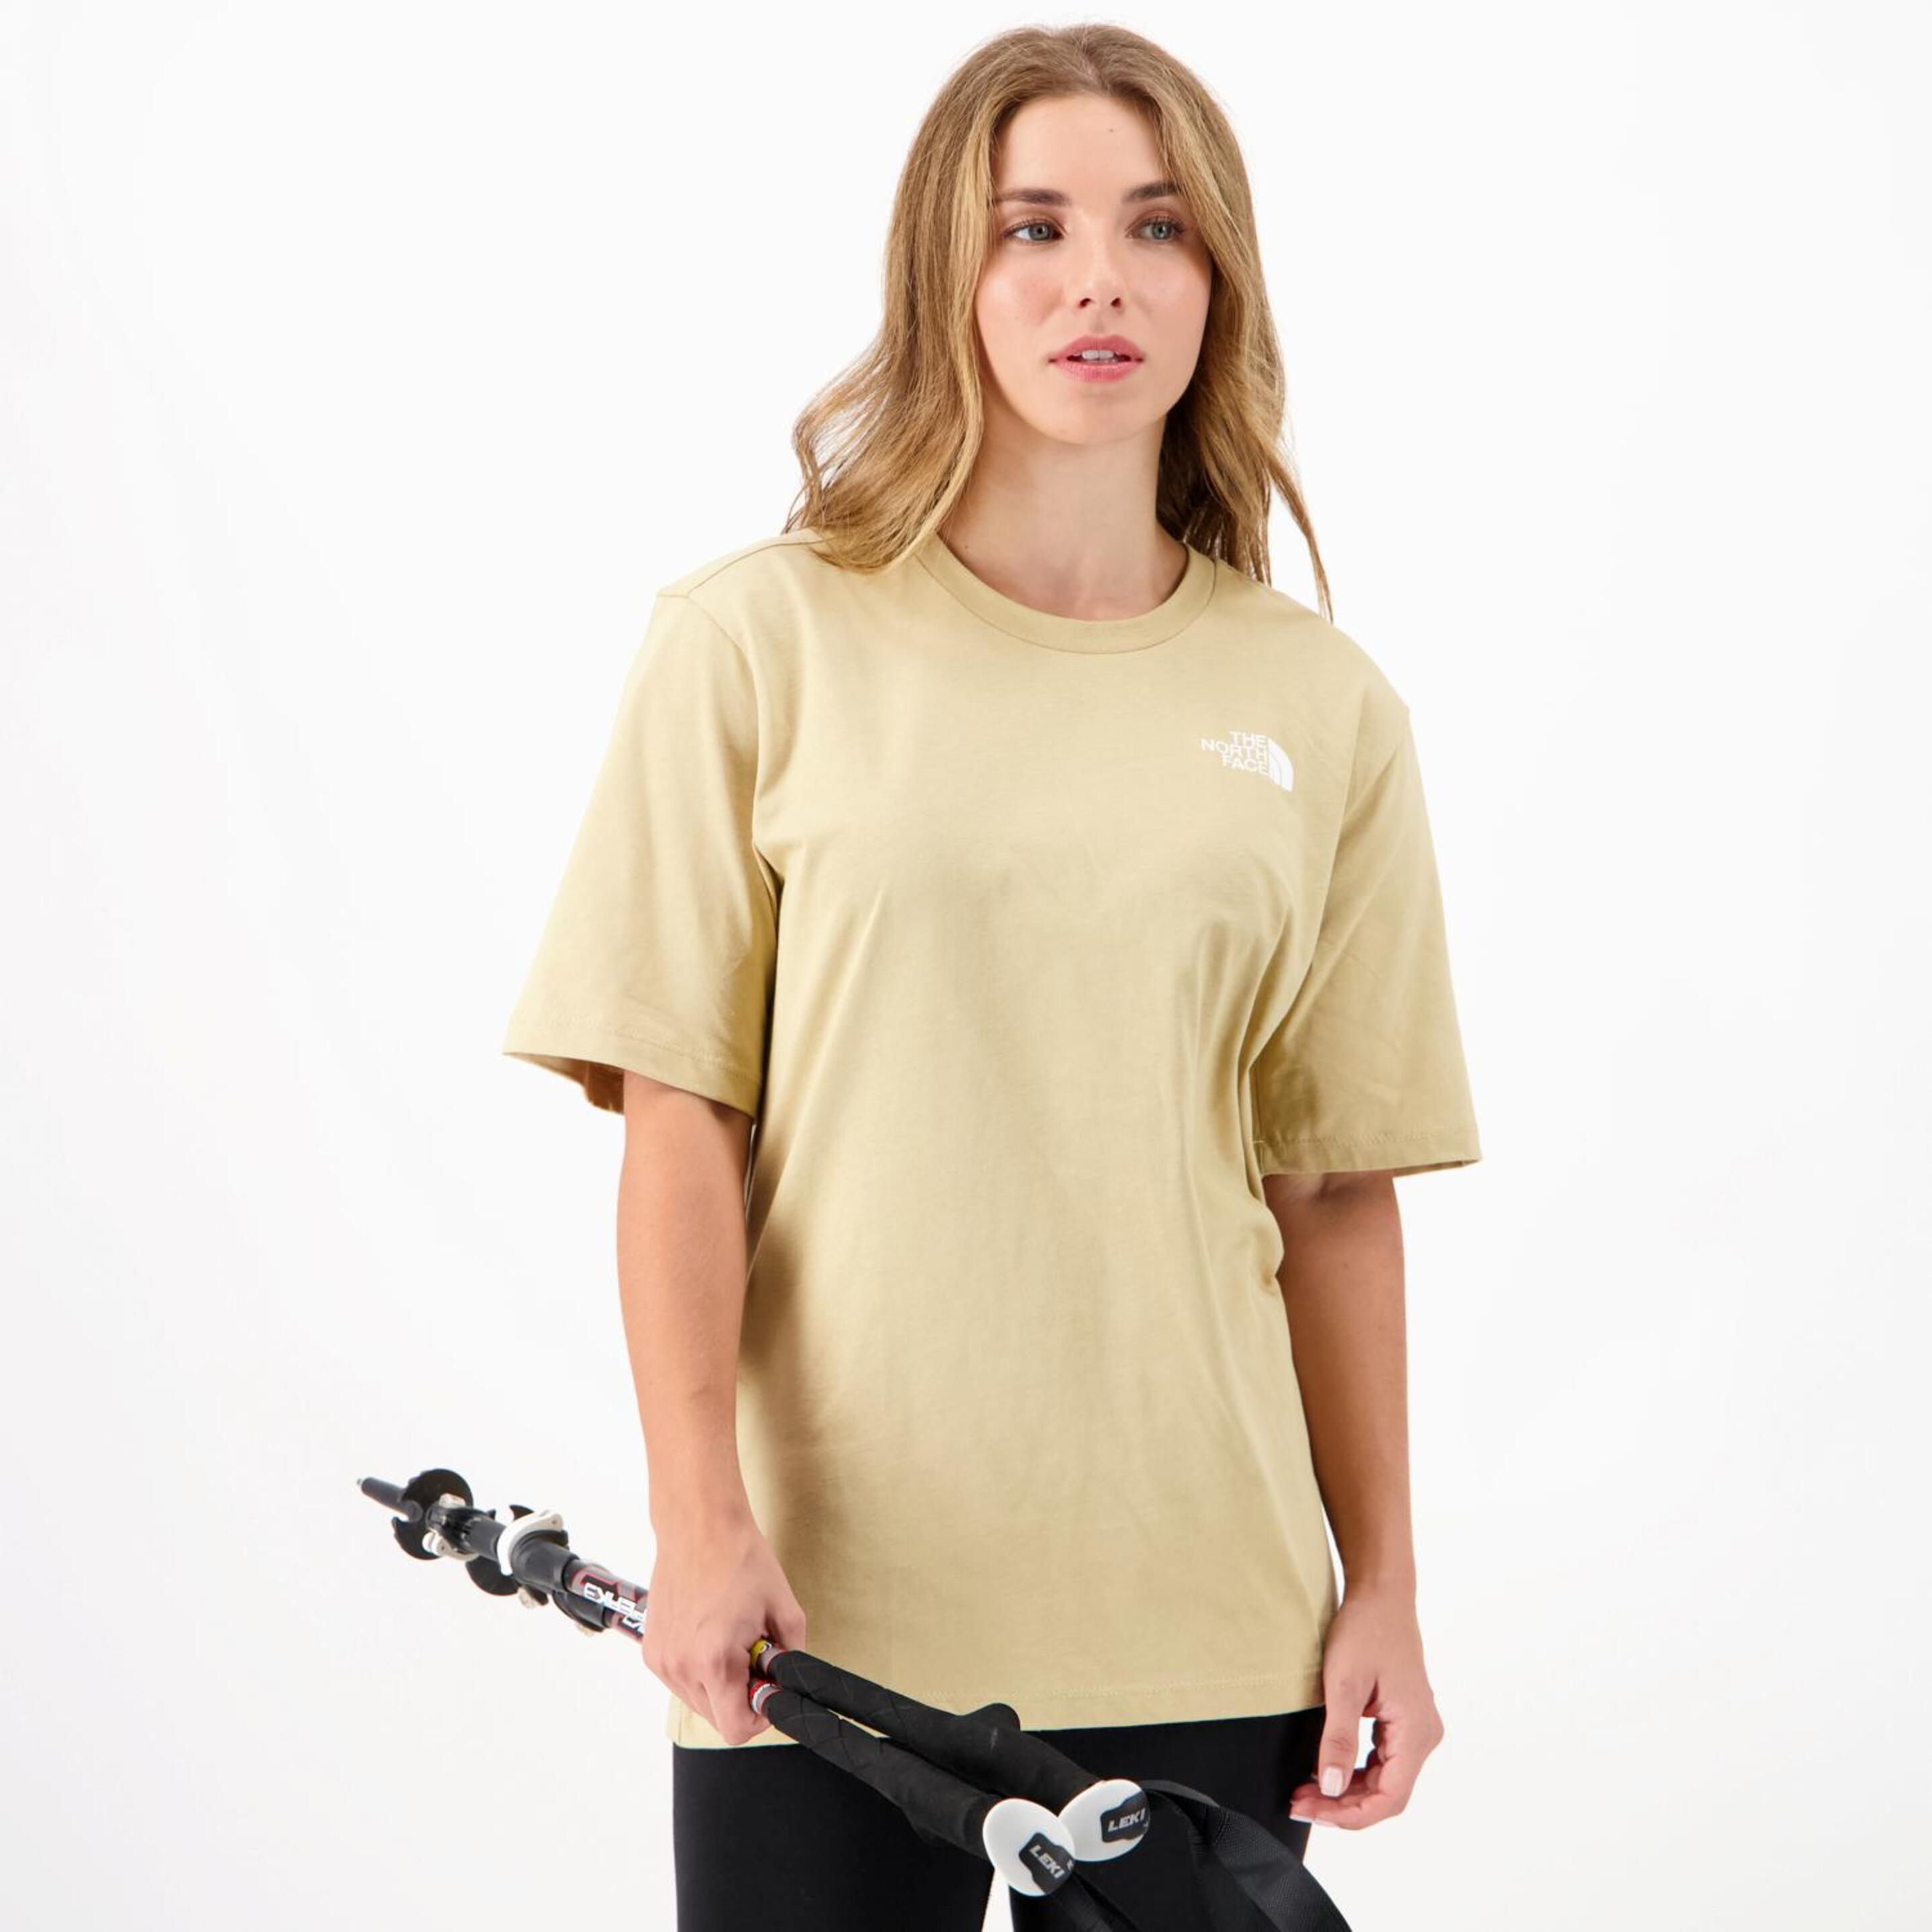 North Face Relaxed - marron - Camiseta Mujer